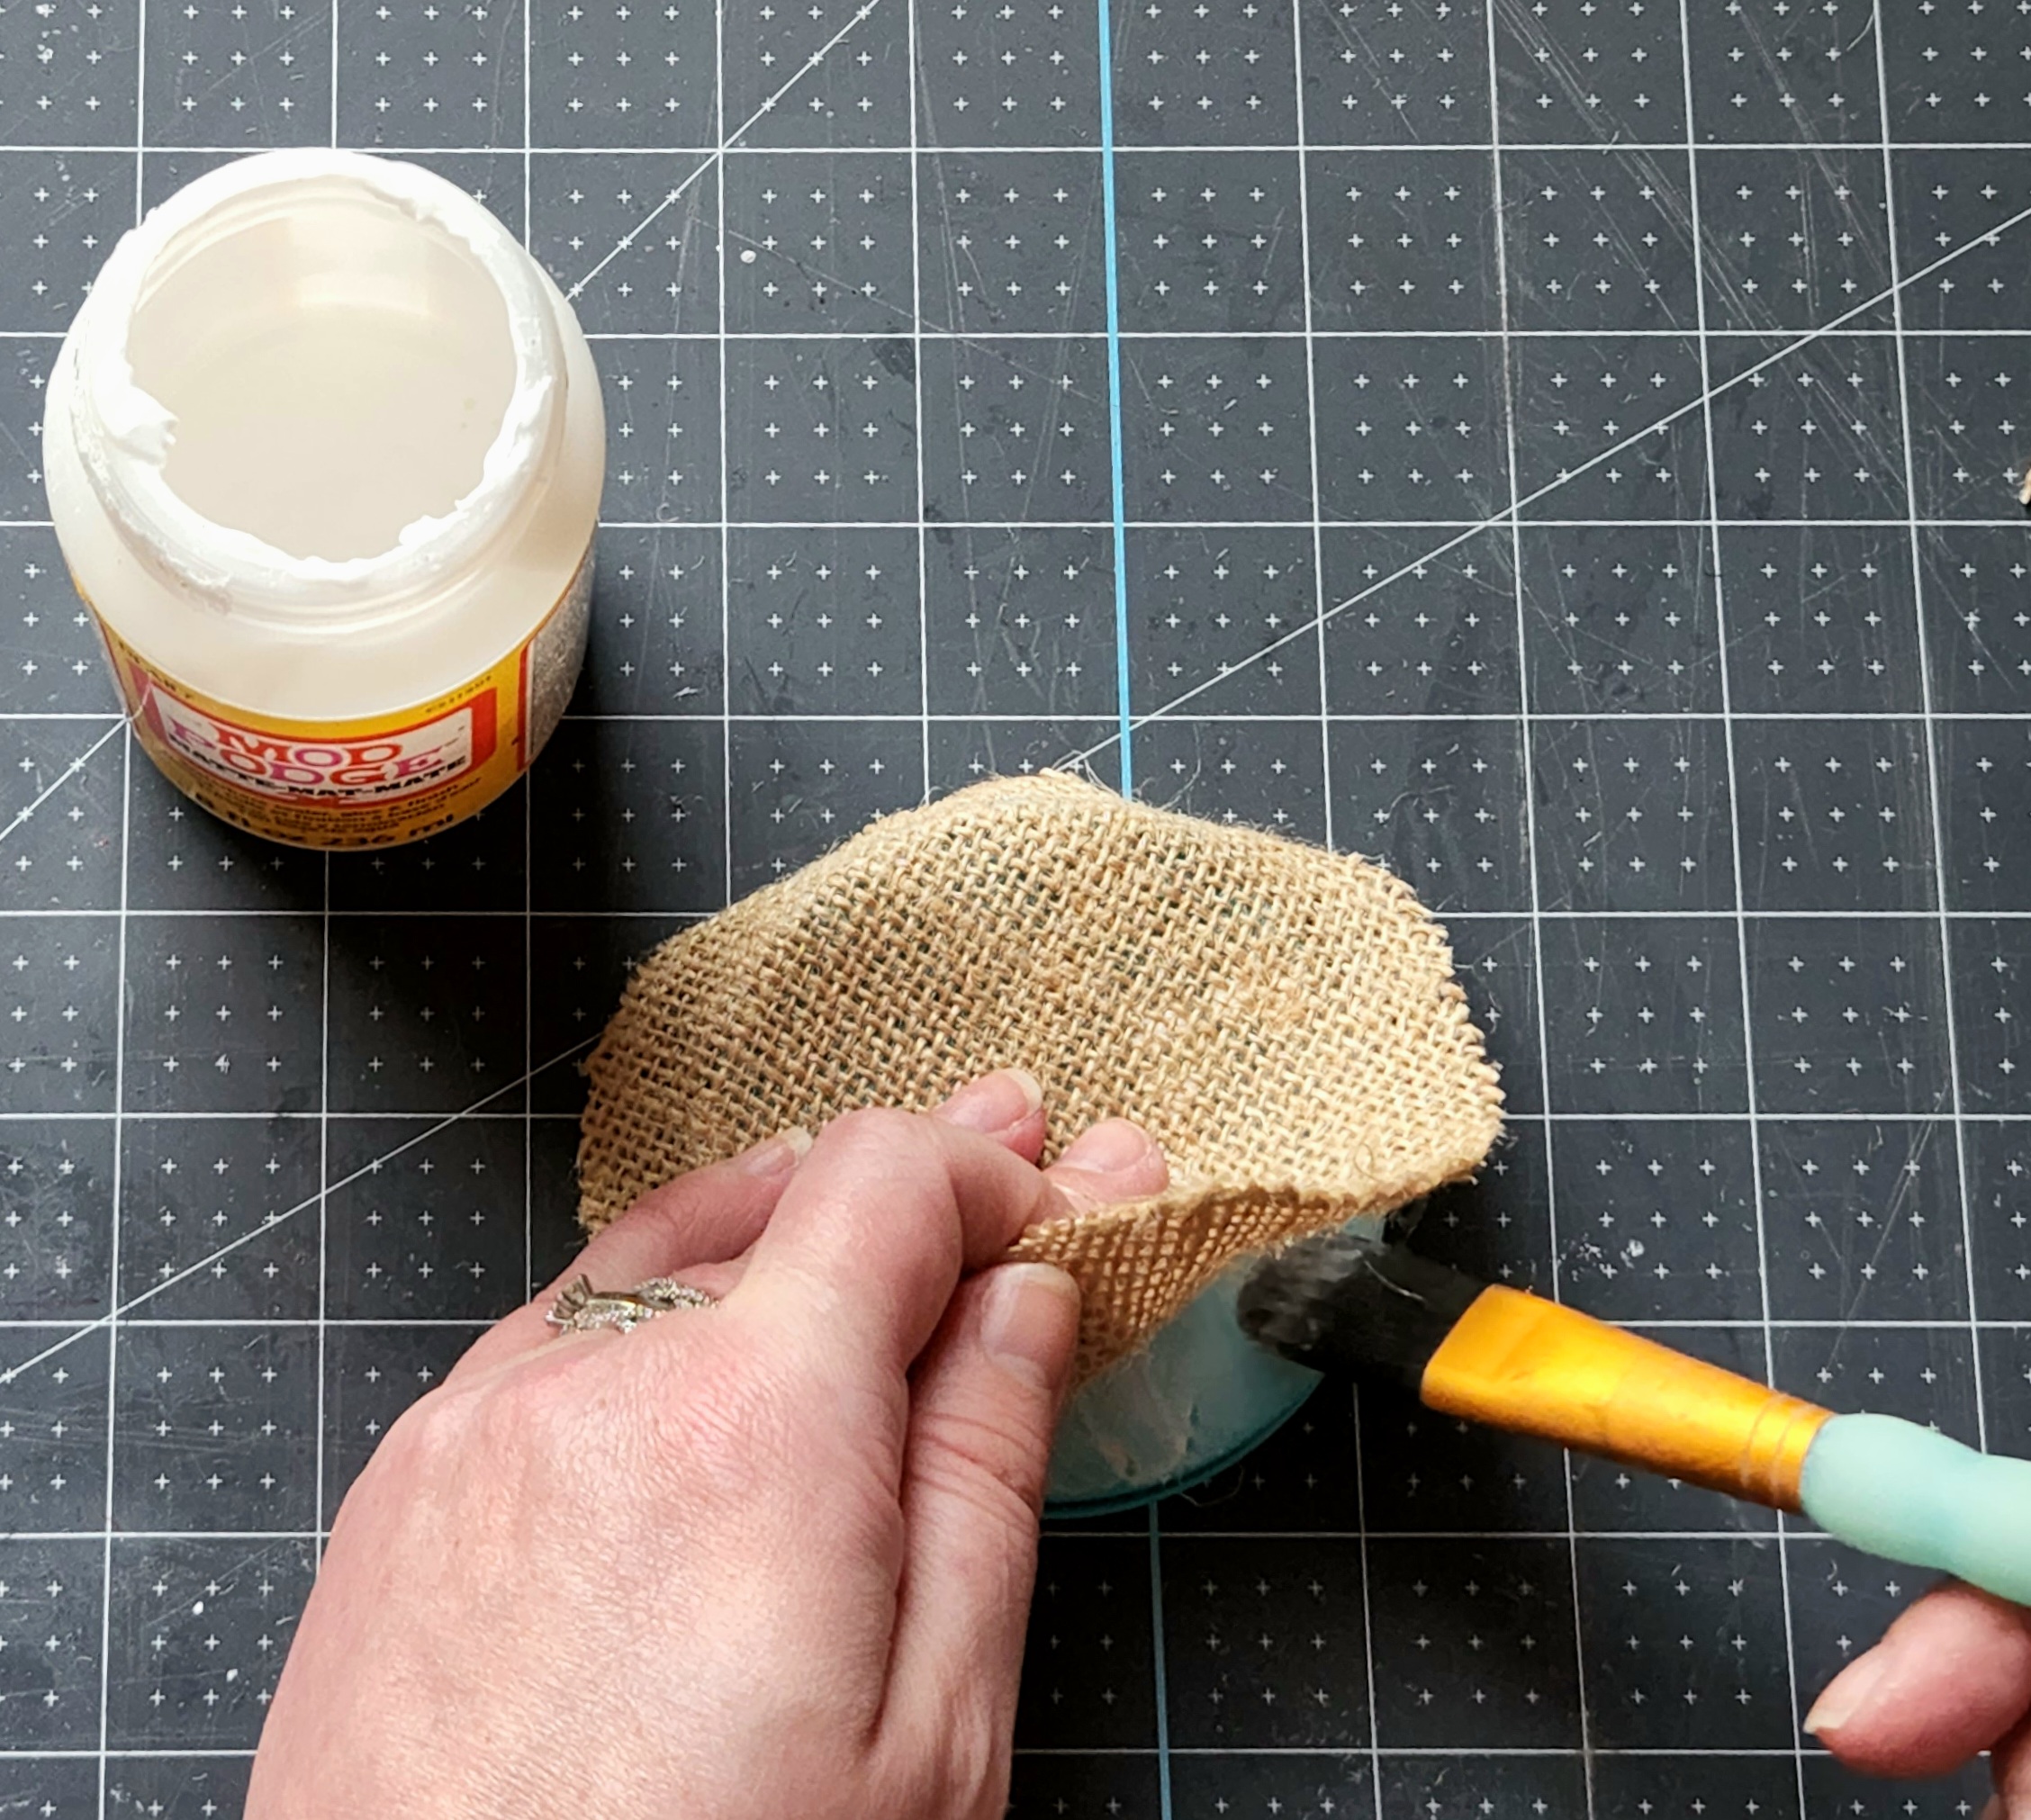 Painting Mod Podge under the burlap on the jar lid before smoothing it out.